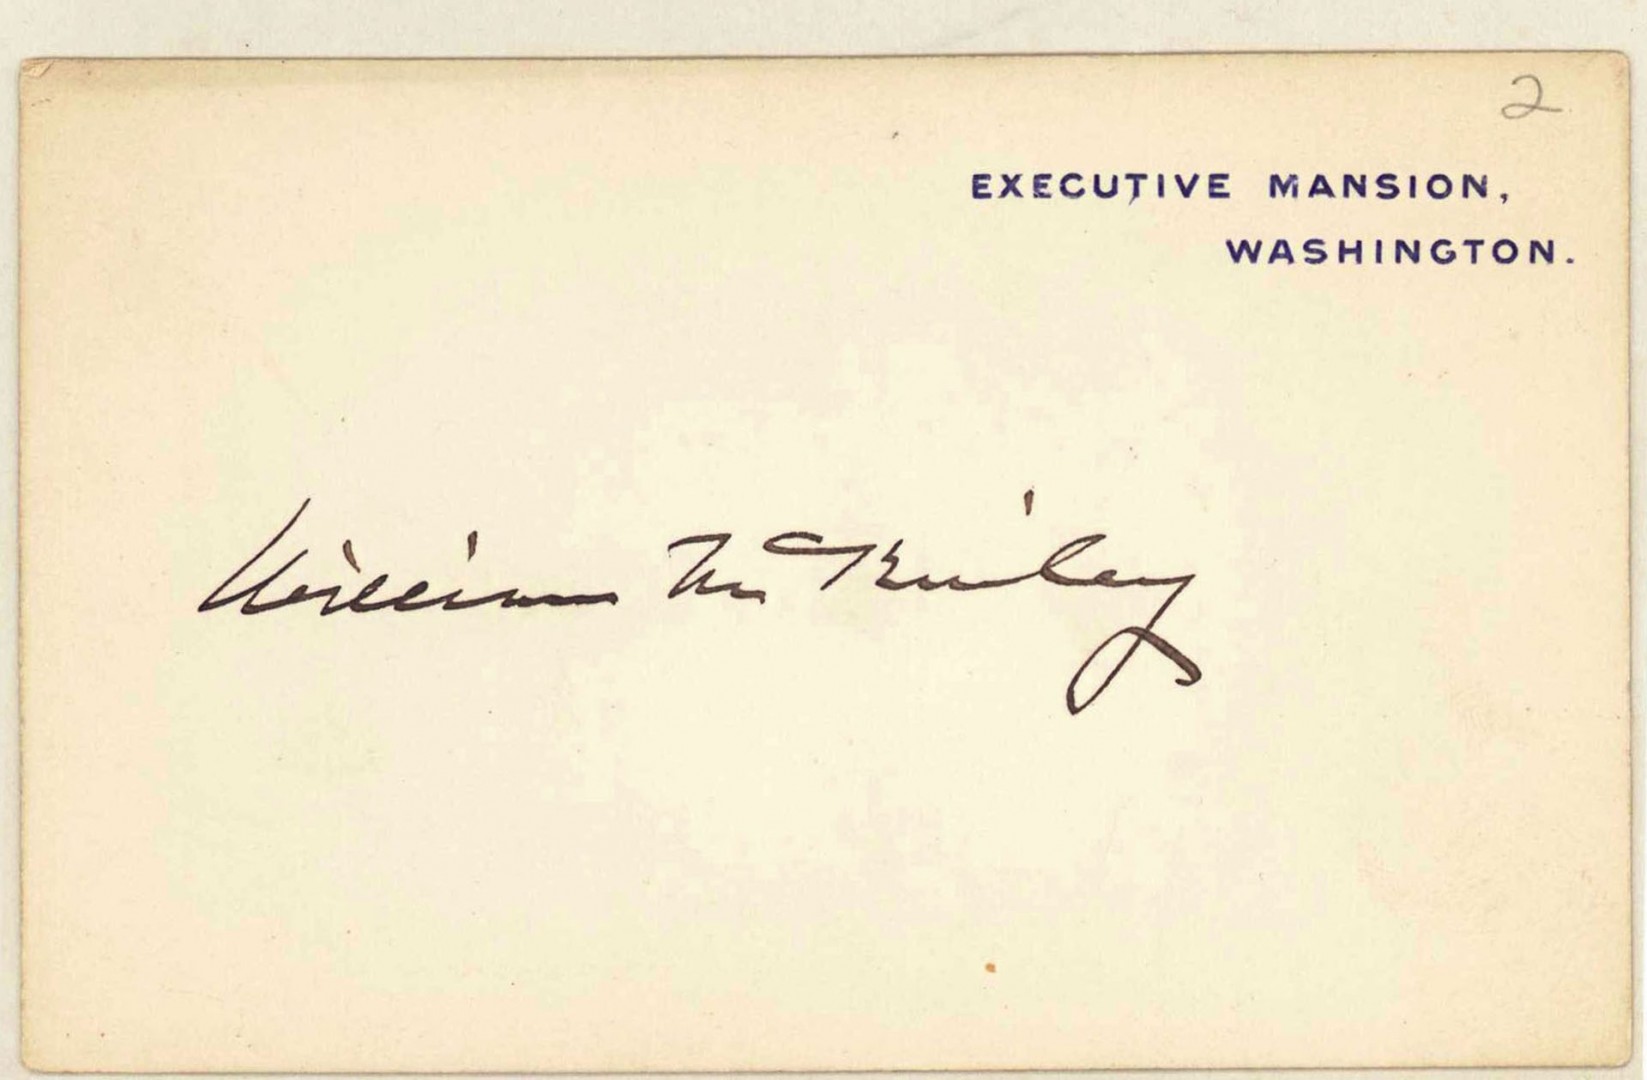 Lot 500: 2 Presidential Documents: Letter, Calling Card